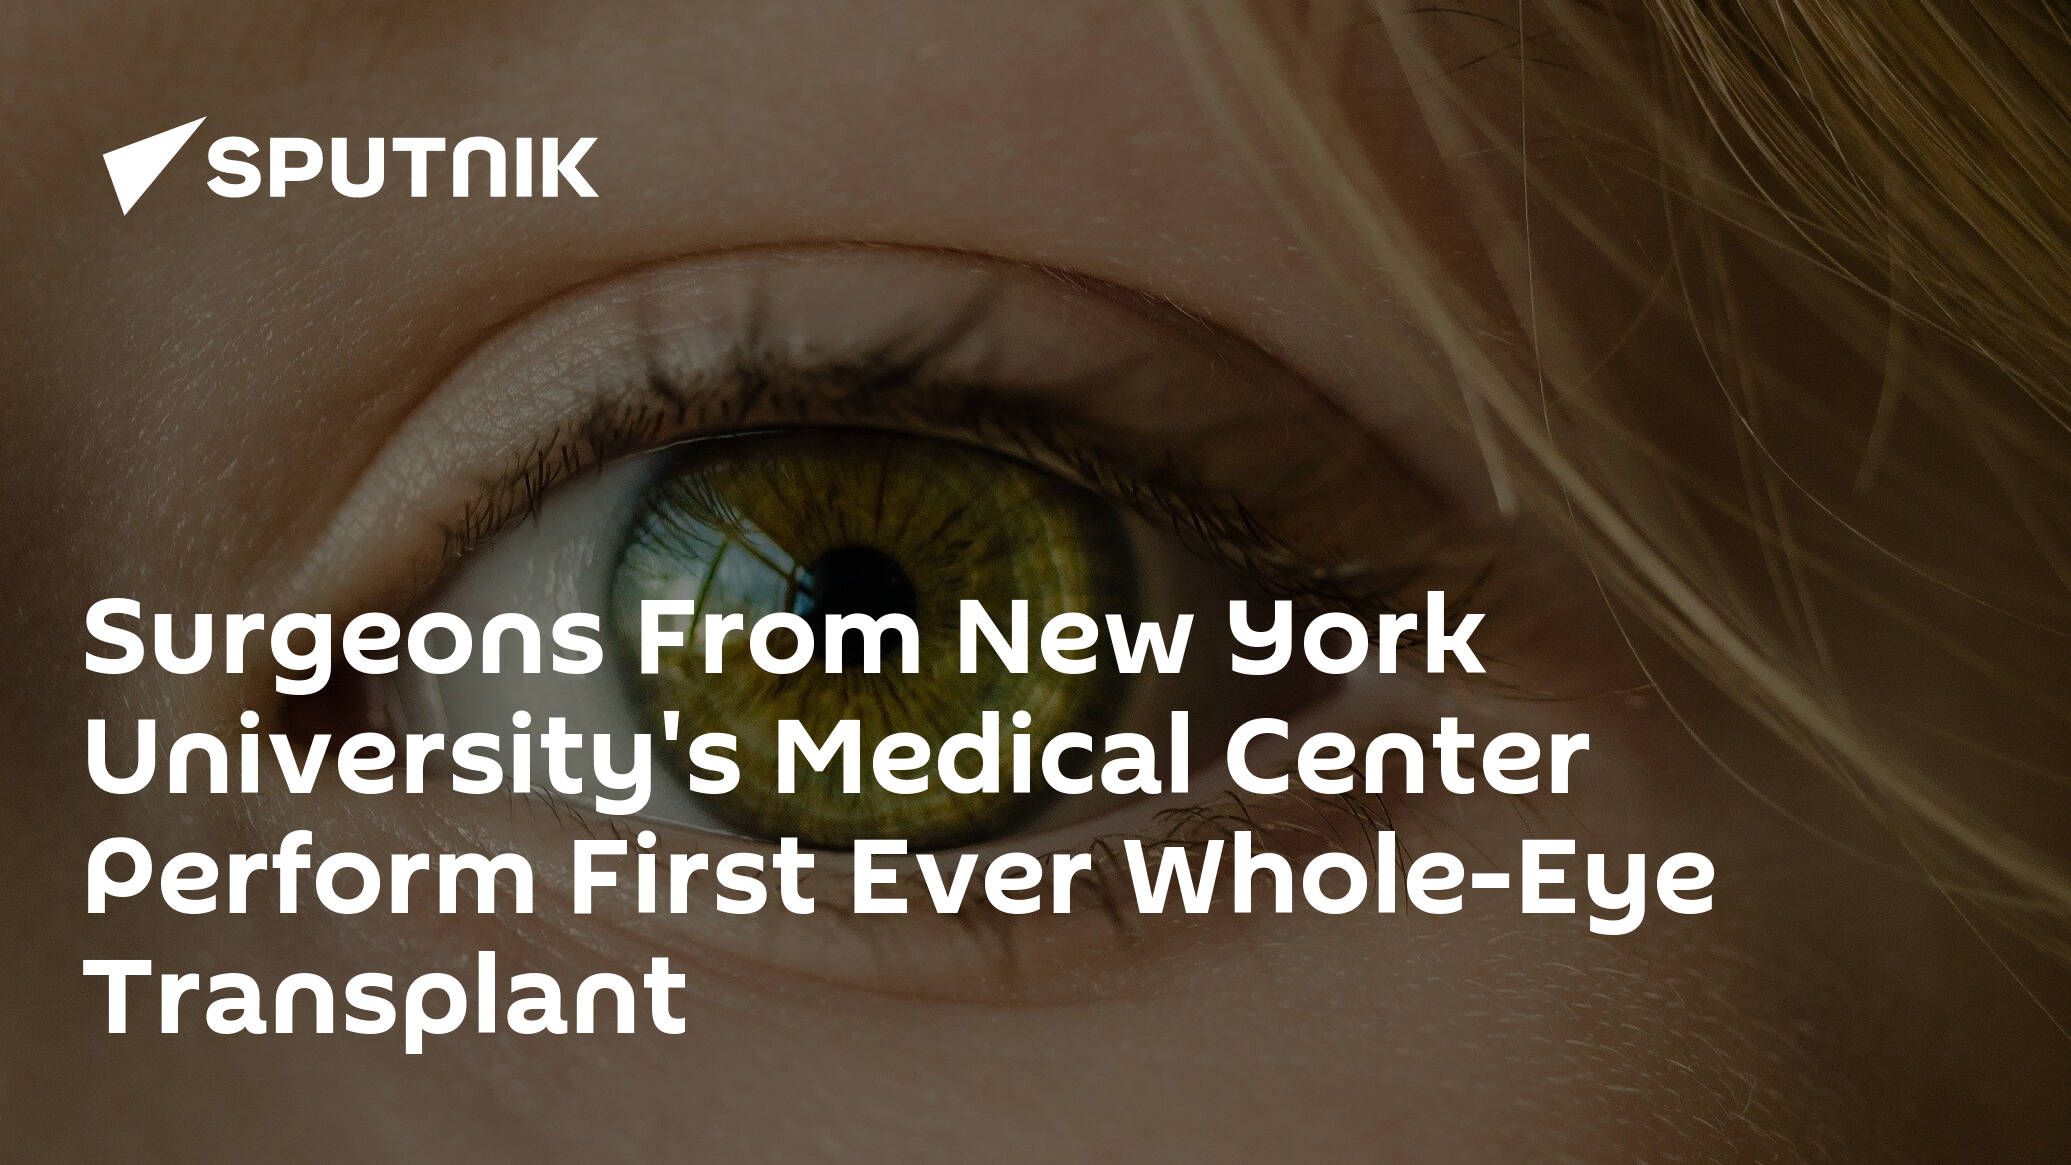 Surgeons From New York University's Medical Center Perform First Ever Whole-Eye Transplant